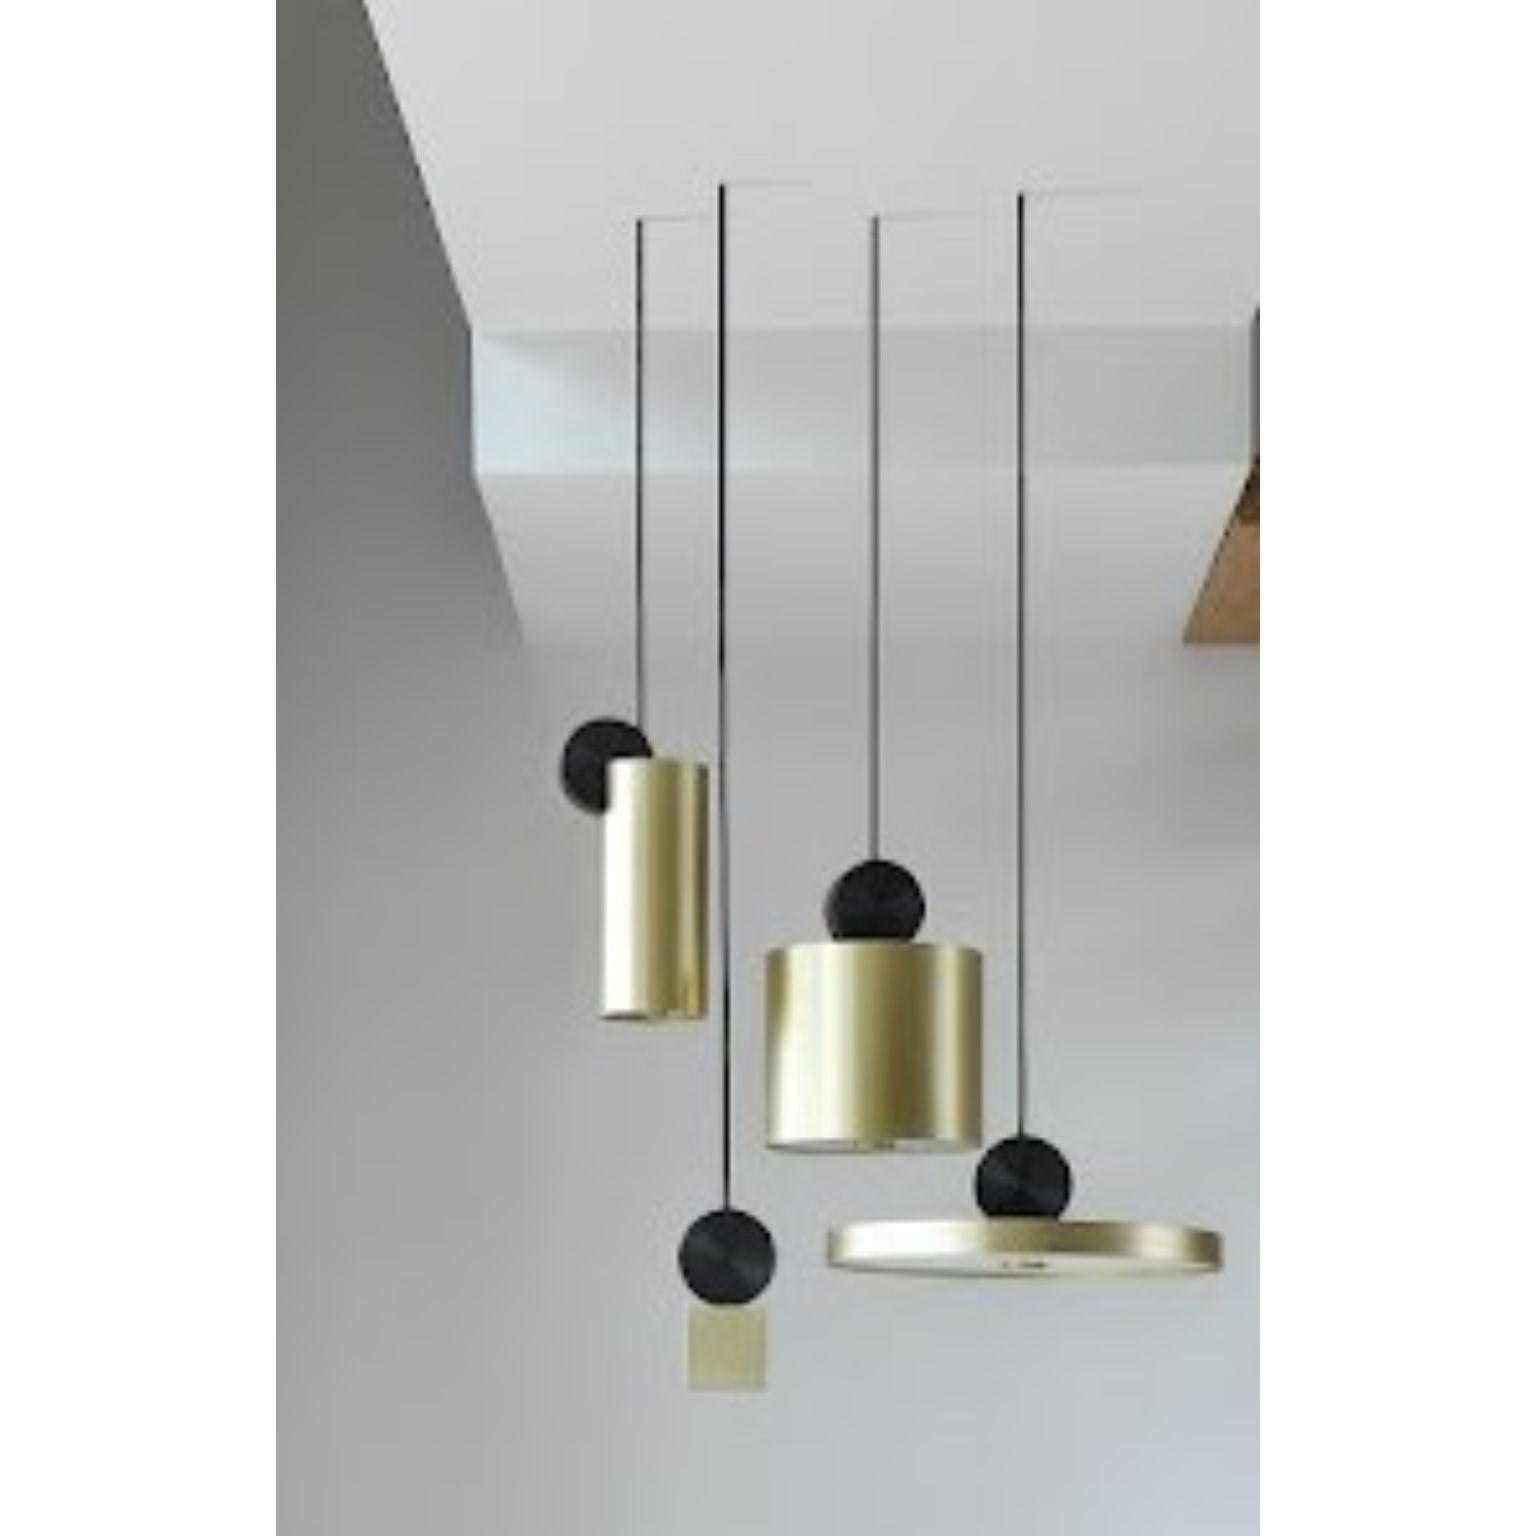 Set of 4 calee pendants by Pool
Dimensions: D 40 x H 216.3, D 16 x H 234.3, D 16 x H 231.3, D 16 x H 221.3 cm
Materials: Solid brass, polycarbonate, black textile cable (2m).
Others finishes and dimensions are available.

All our lamps can be